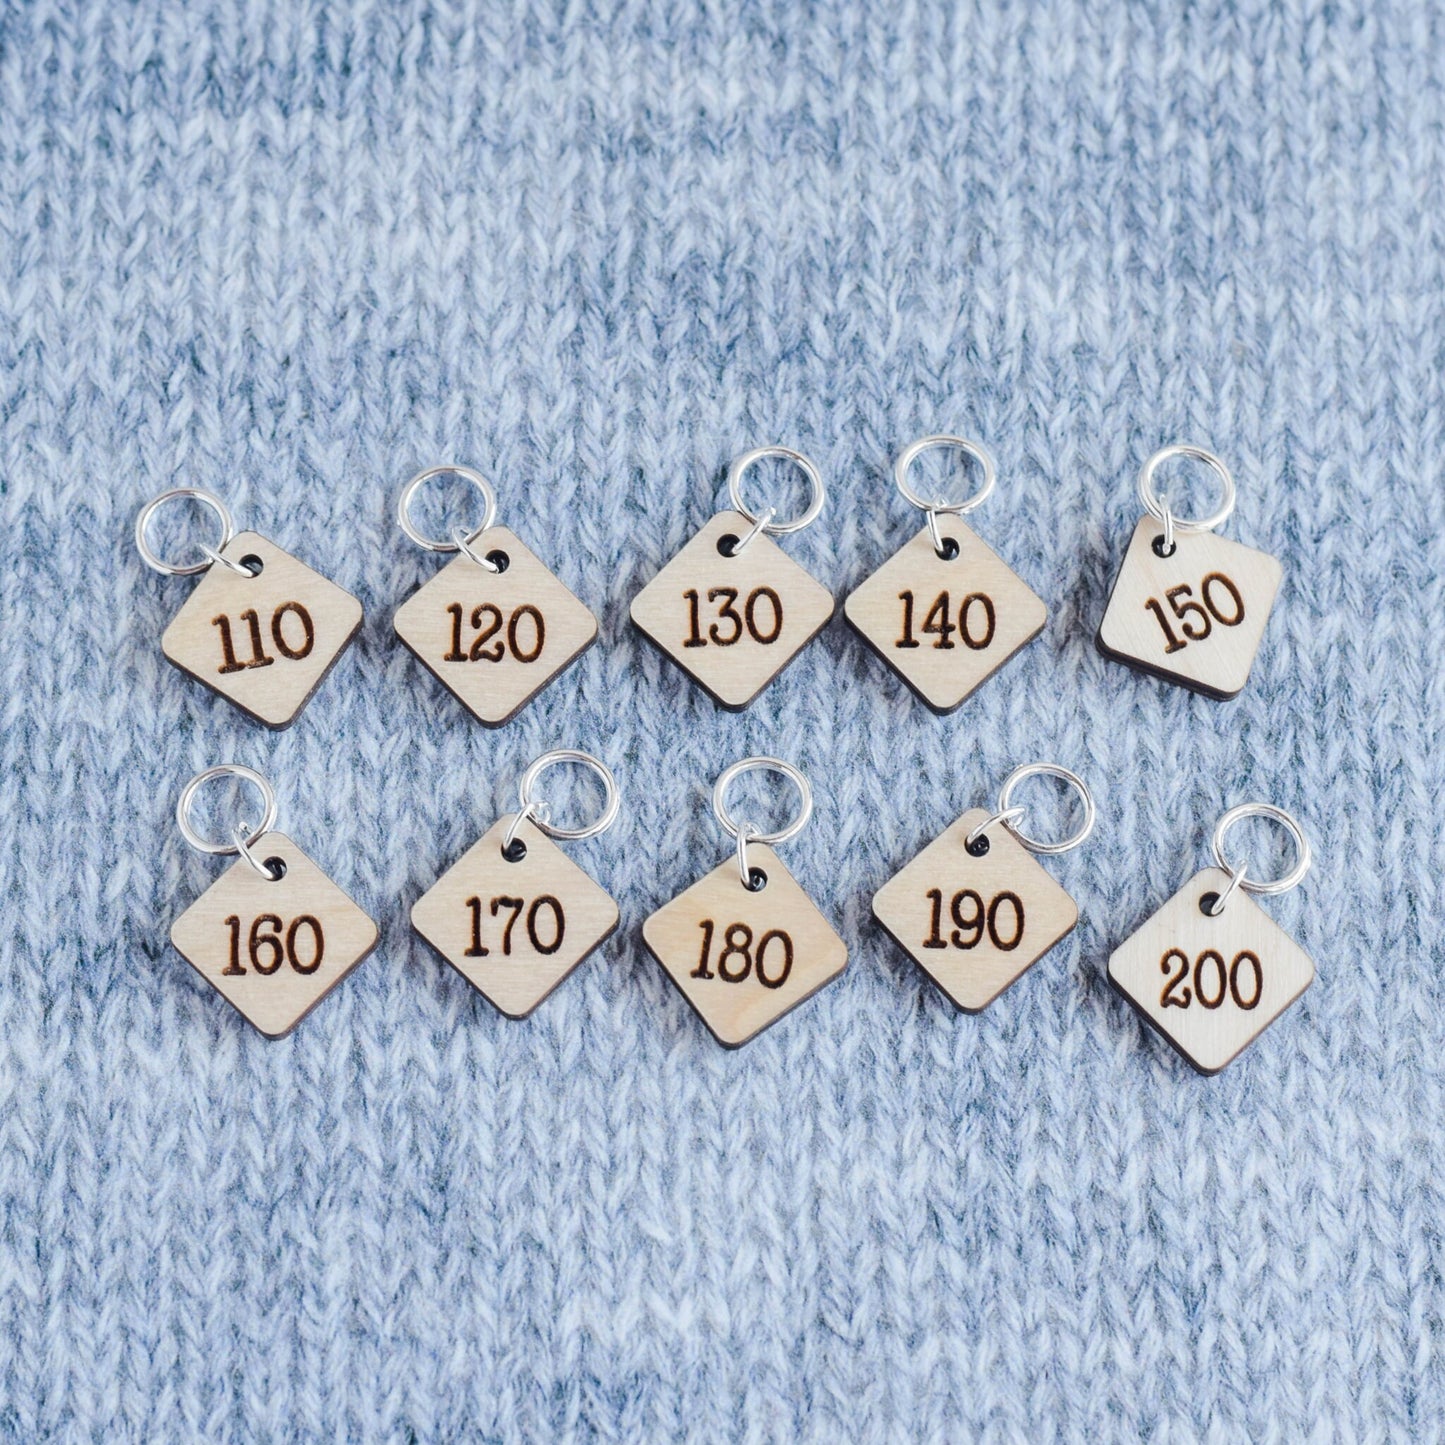 Set of 10 Stitch Markers - 110-200 - Cast On Counting Numbers, Laser Engraved Wood Stitch Markers, Counting Stitch Markers